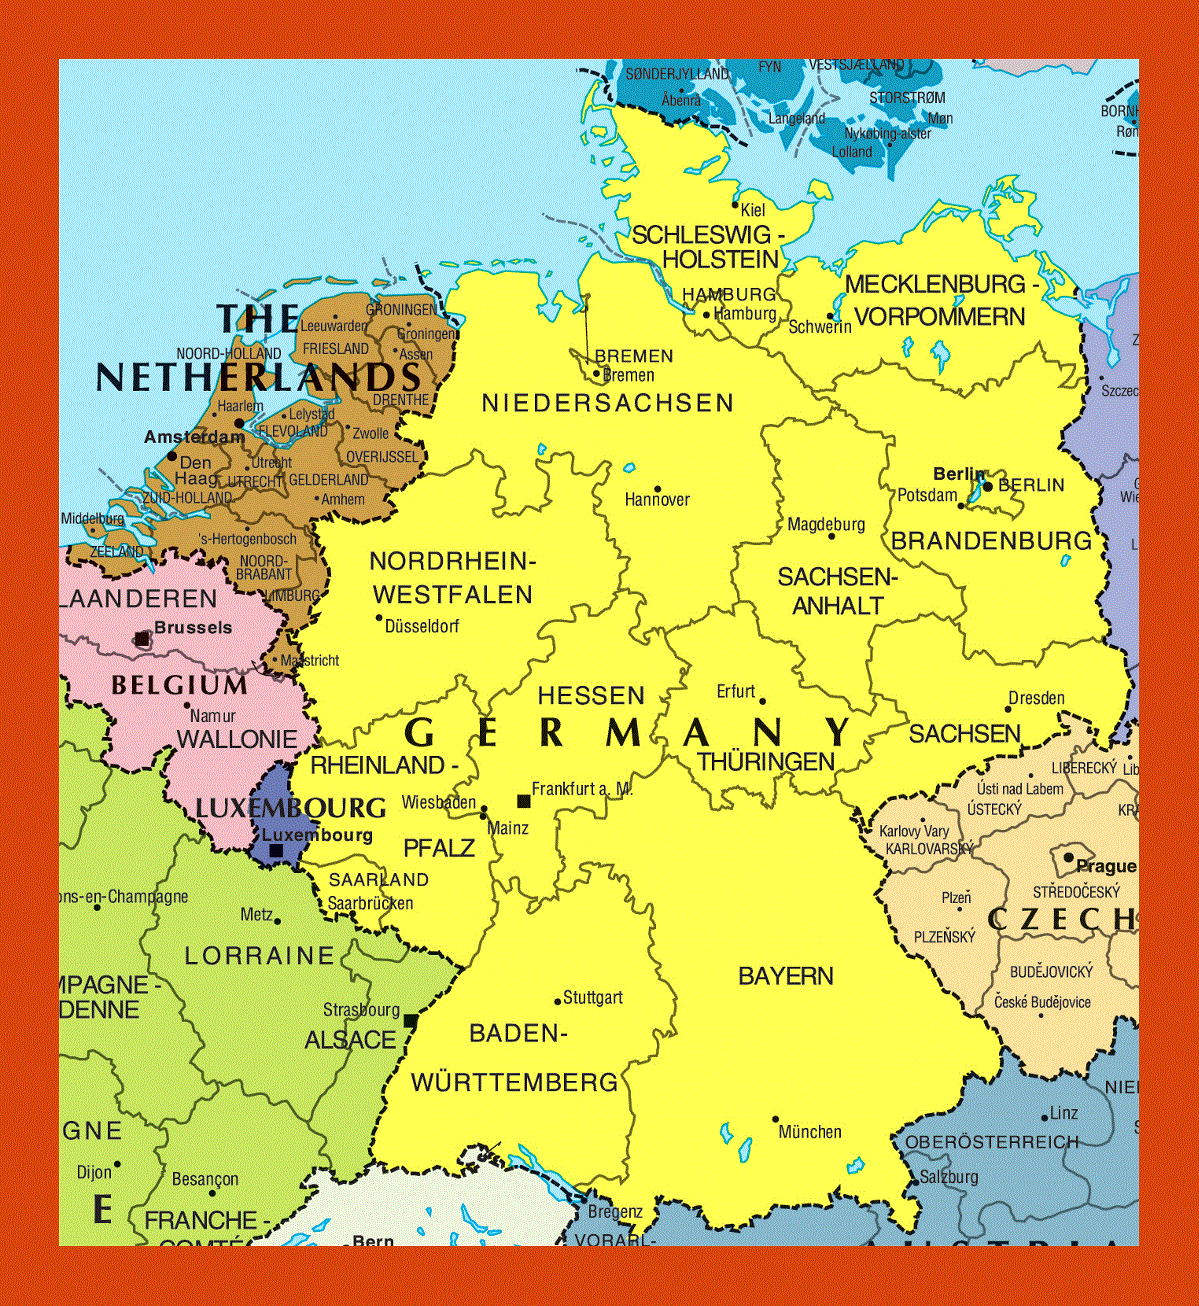 Political and administrative map of Germany and Netherlands